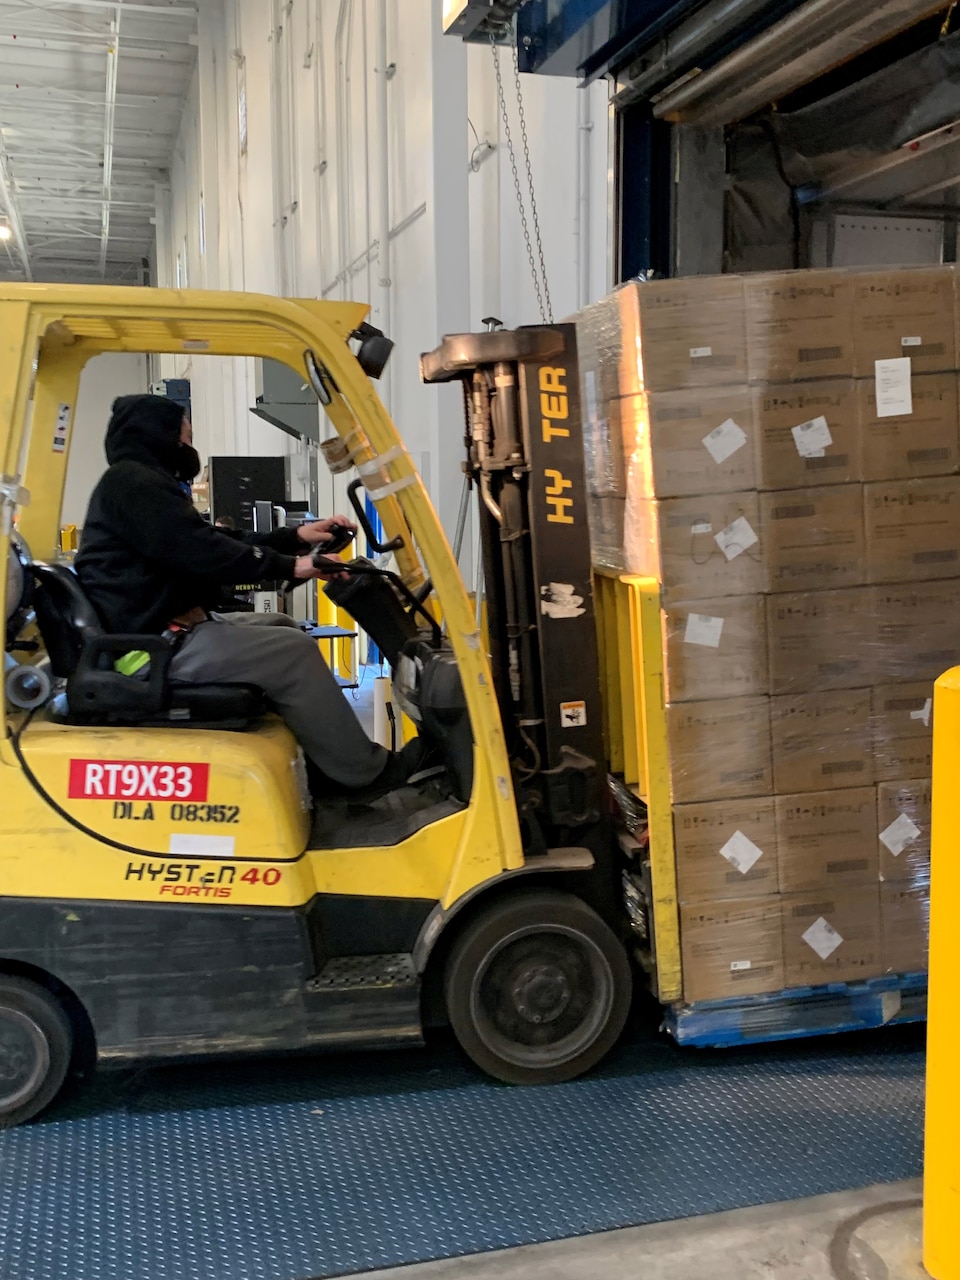 A man drives a forklift carrying COVID-19 test kits.